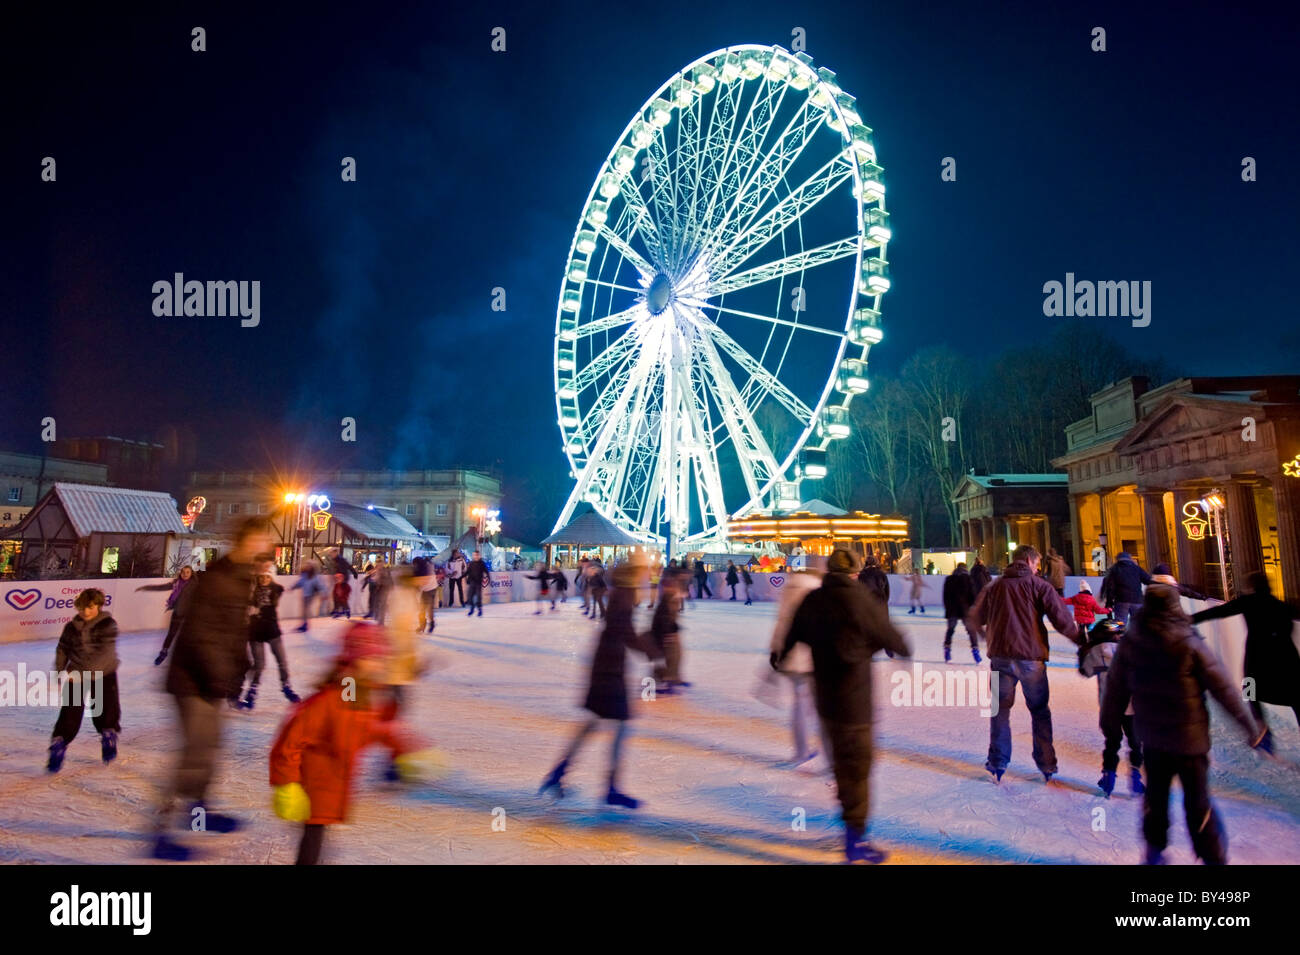 The Big Wheel & Ice Rink at Chester Victorian Christmas Market, Castle Grounds, Chester, Cheshire, England, UK Stock Photo